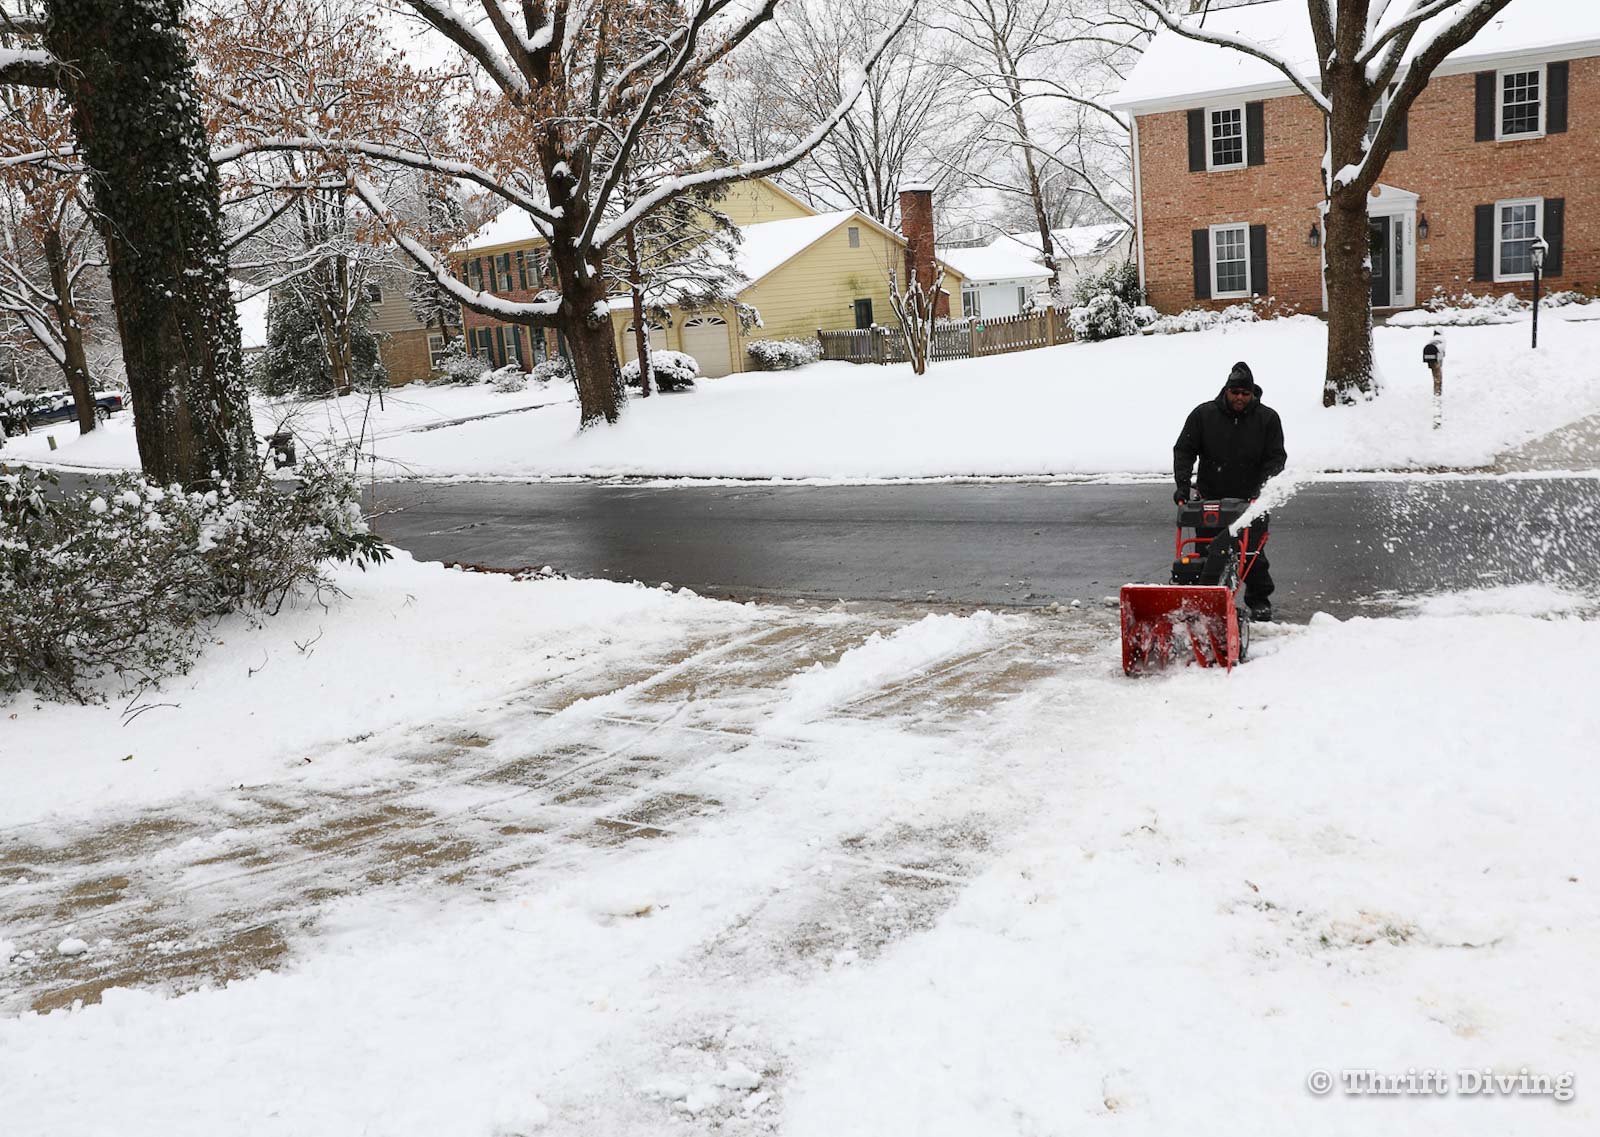 5 Questions You Must As Before Buying and Using a Snowblower - Snow blowing a driveway - Thrift Diving